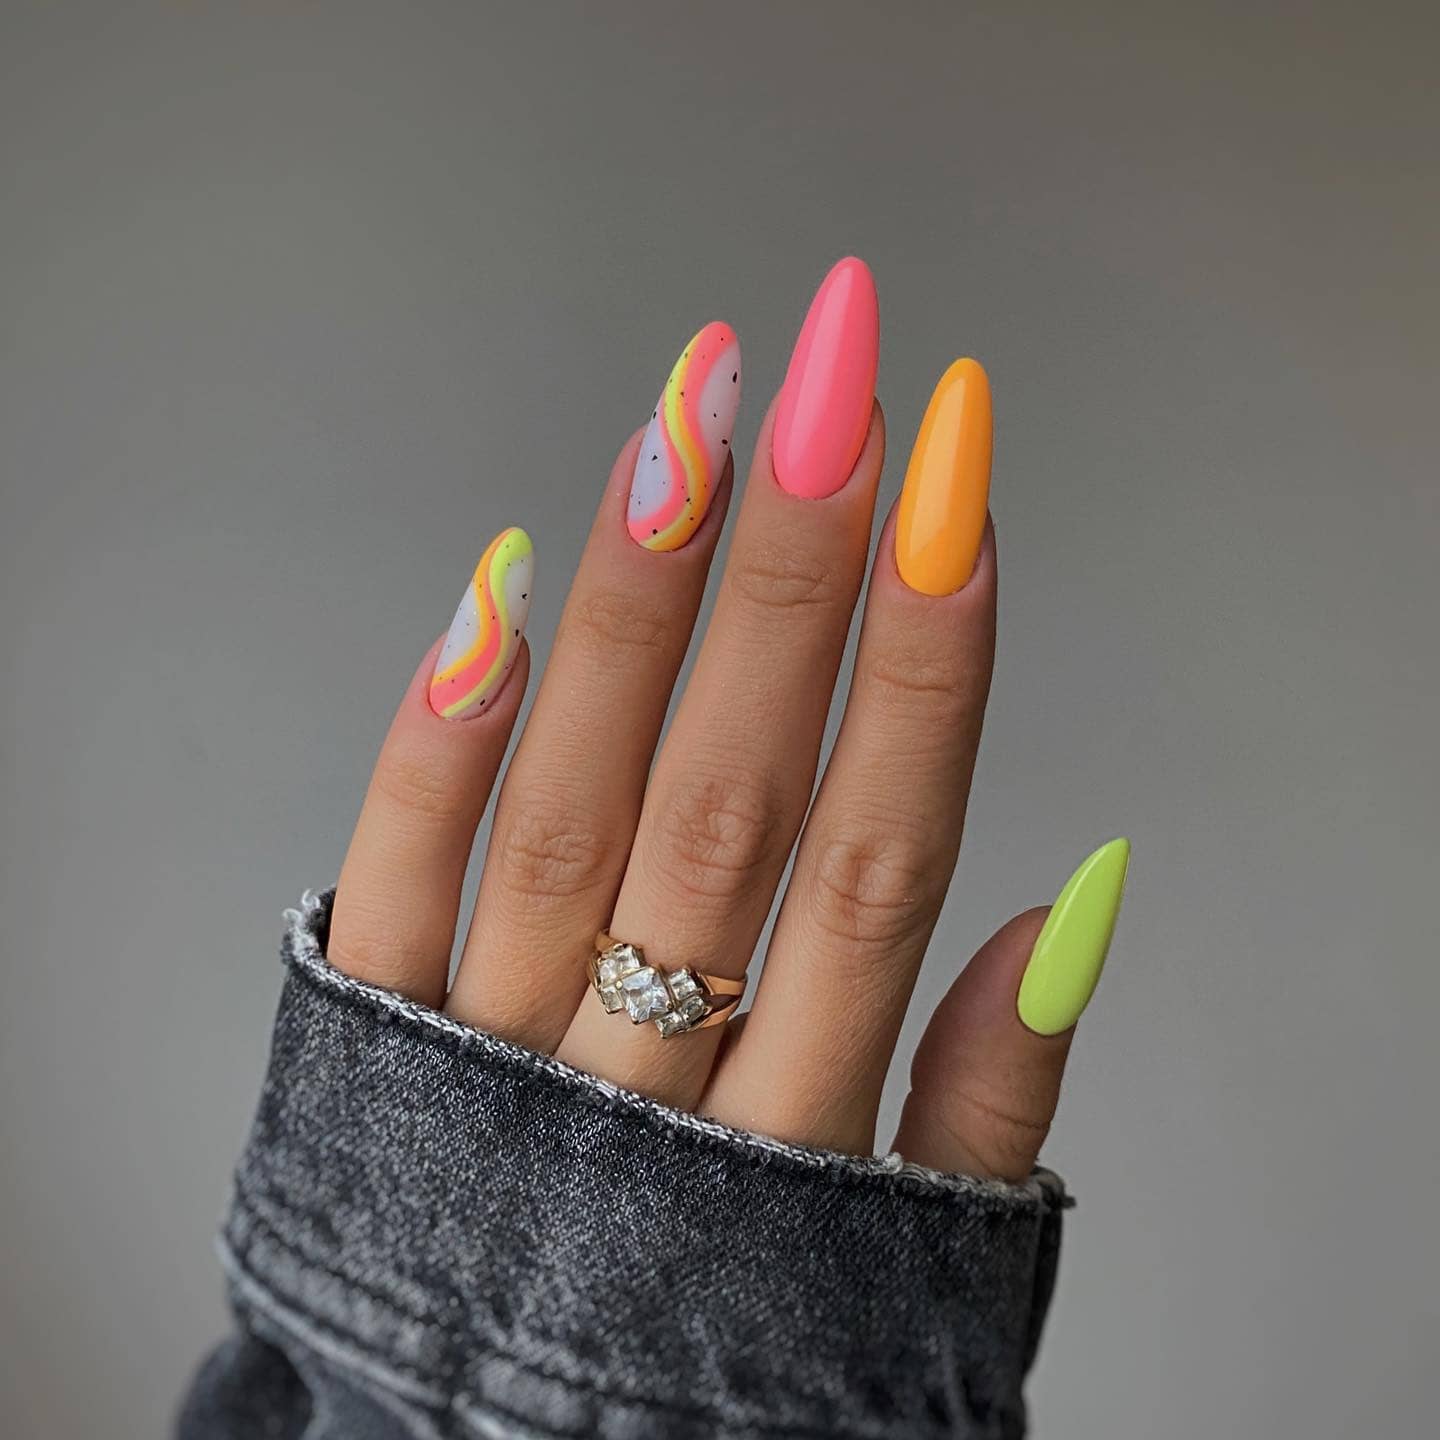 Over 100 Bright Summer Nail Art Designs That Will Be So Trendy images 1